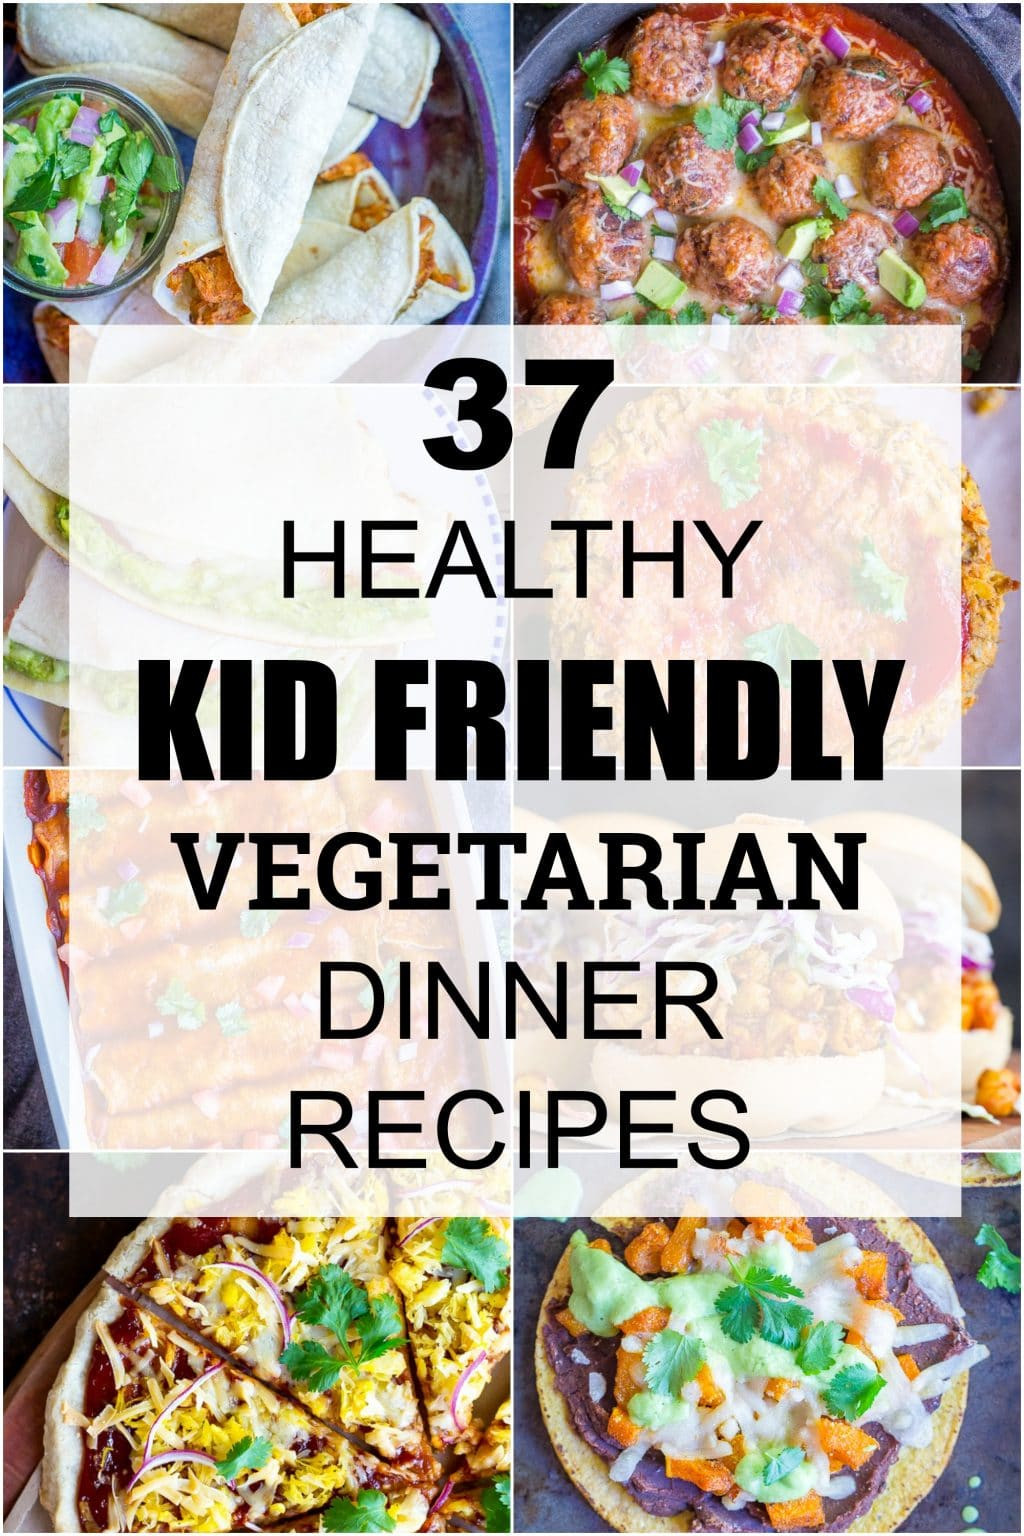 Recipe Ideas For Kids
 37 Healthy Kid Friendly Ve arian Dinner Recipes She